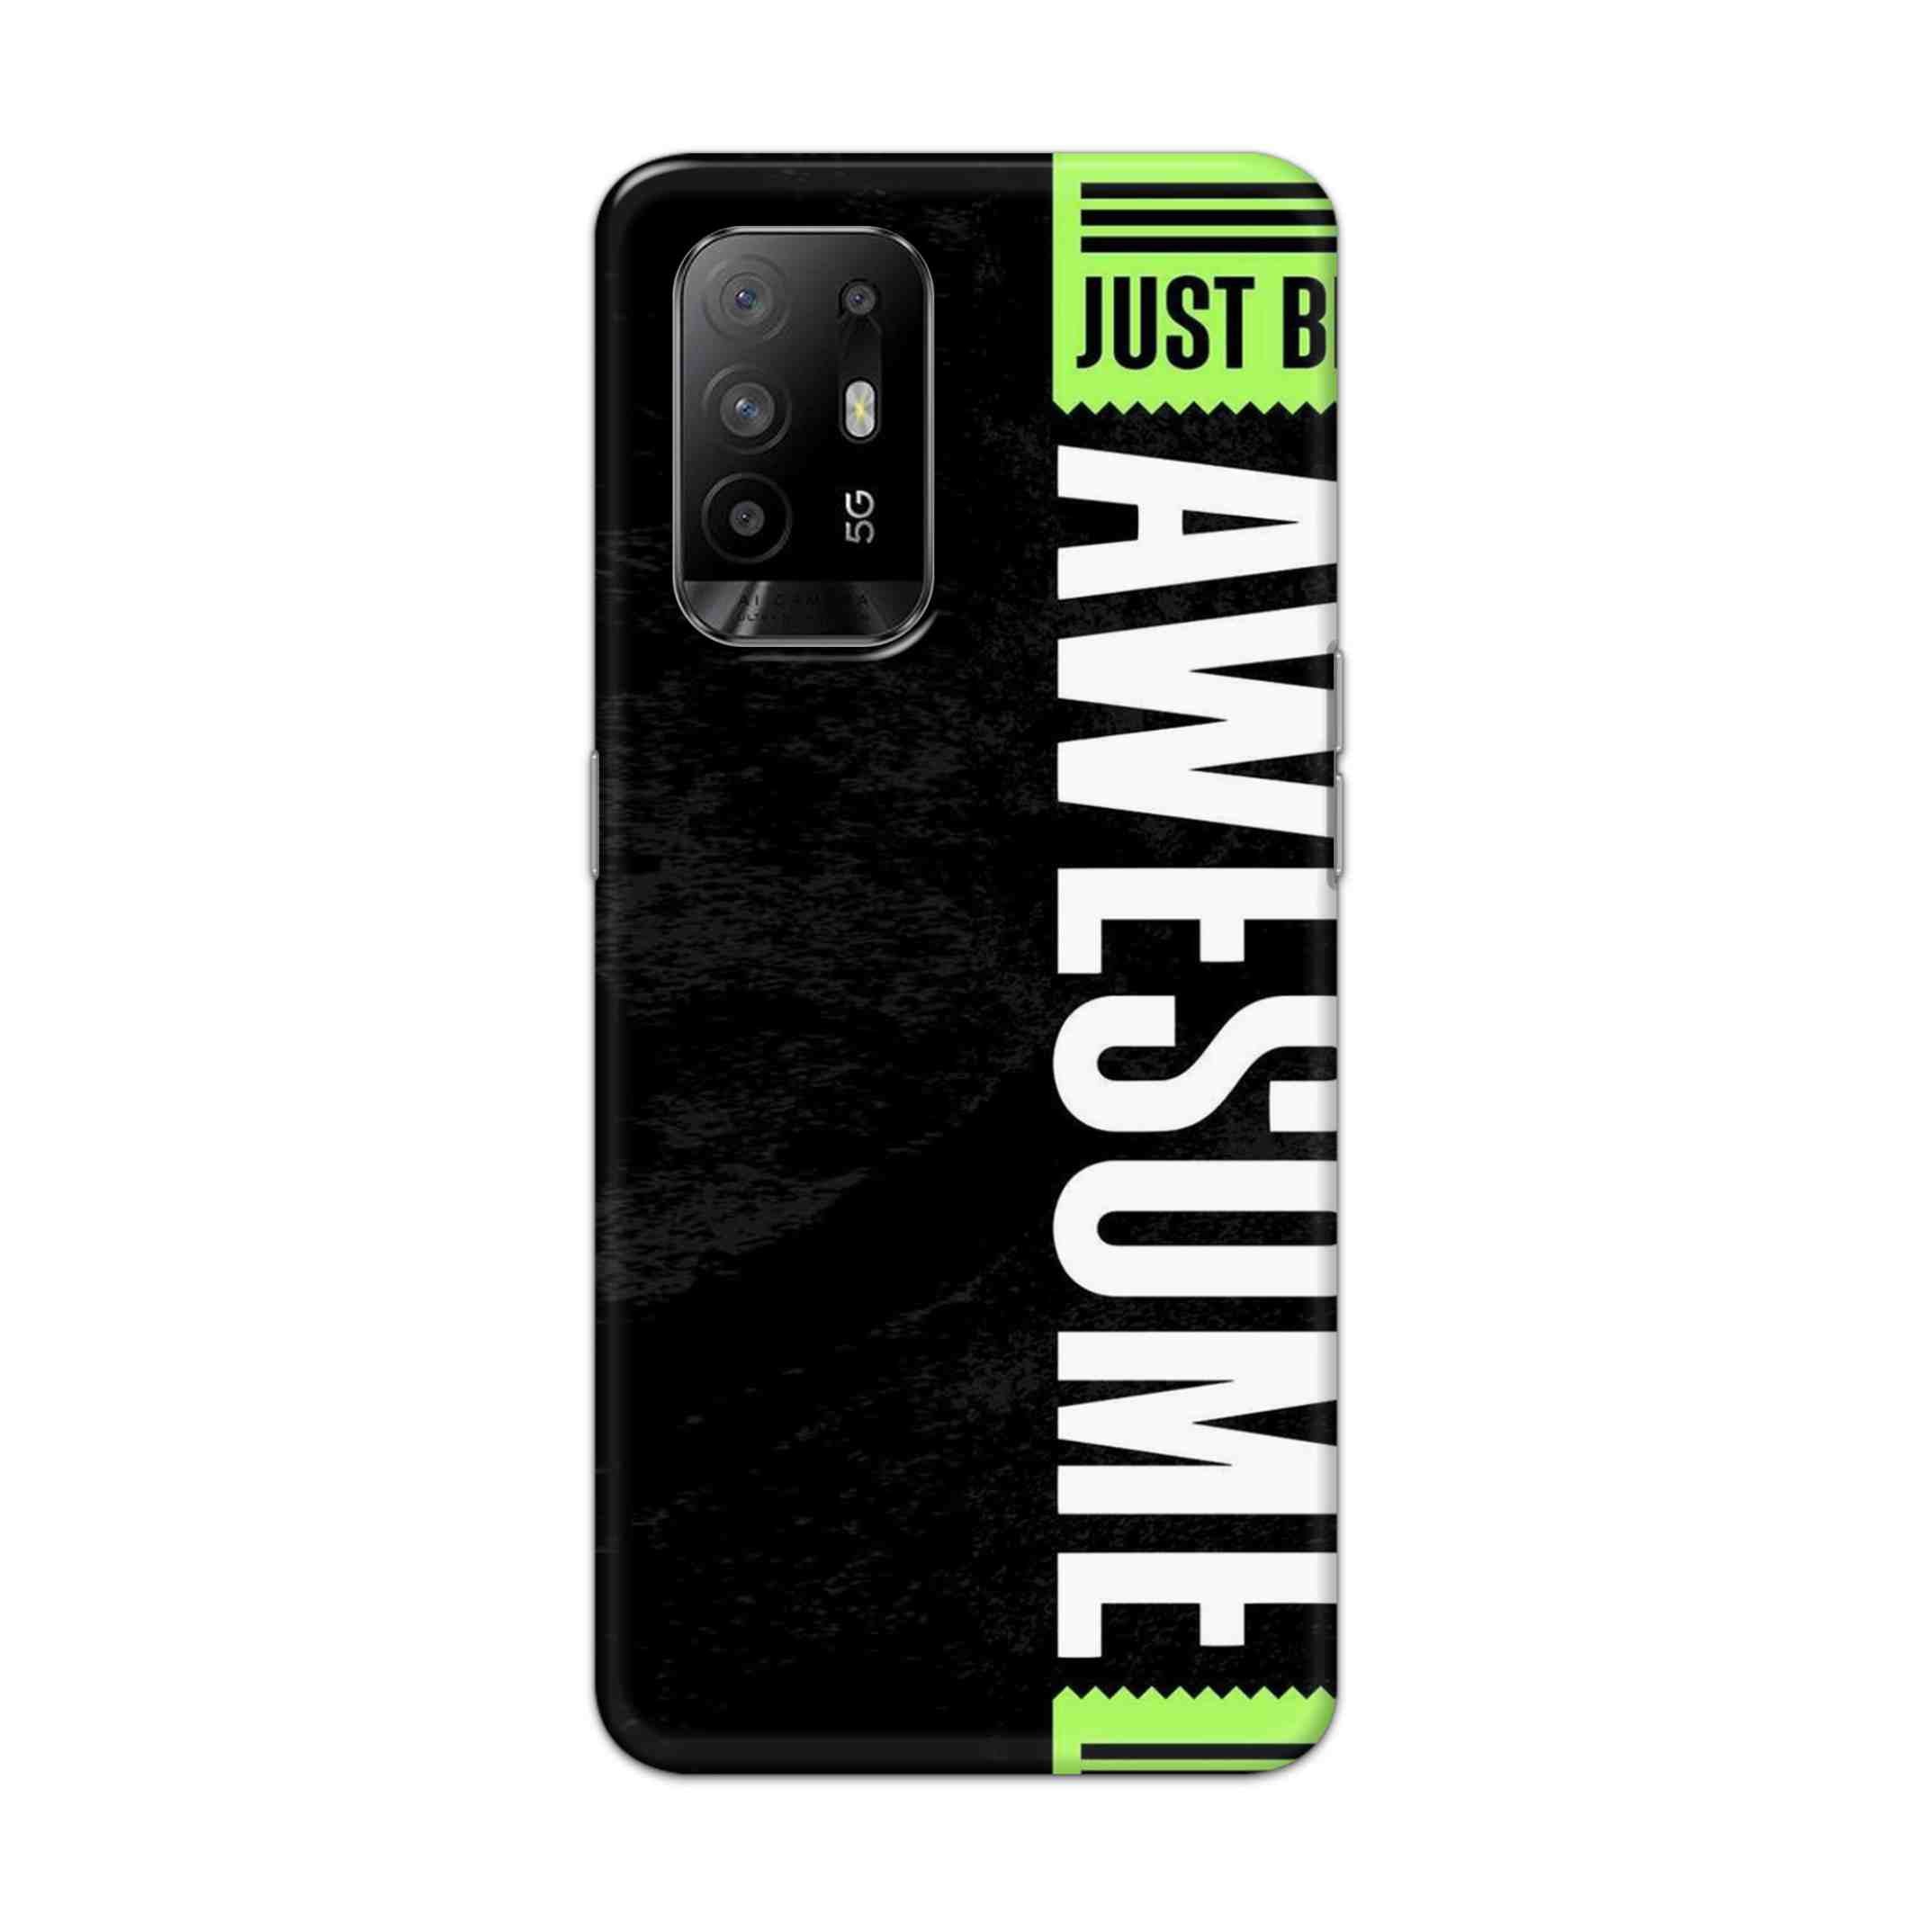 Buy Awesome Street Hard Back Mobile Phone Case Cover For Oppo F19 Pro Plus Online